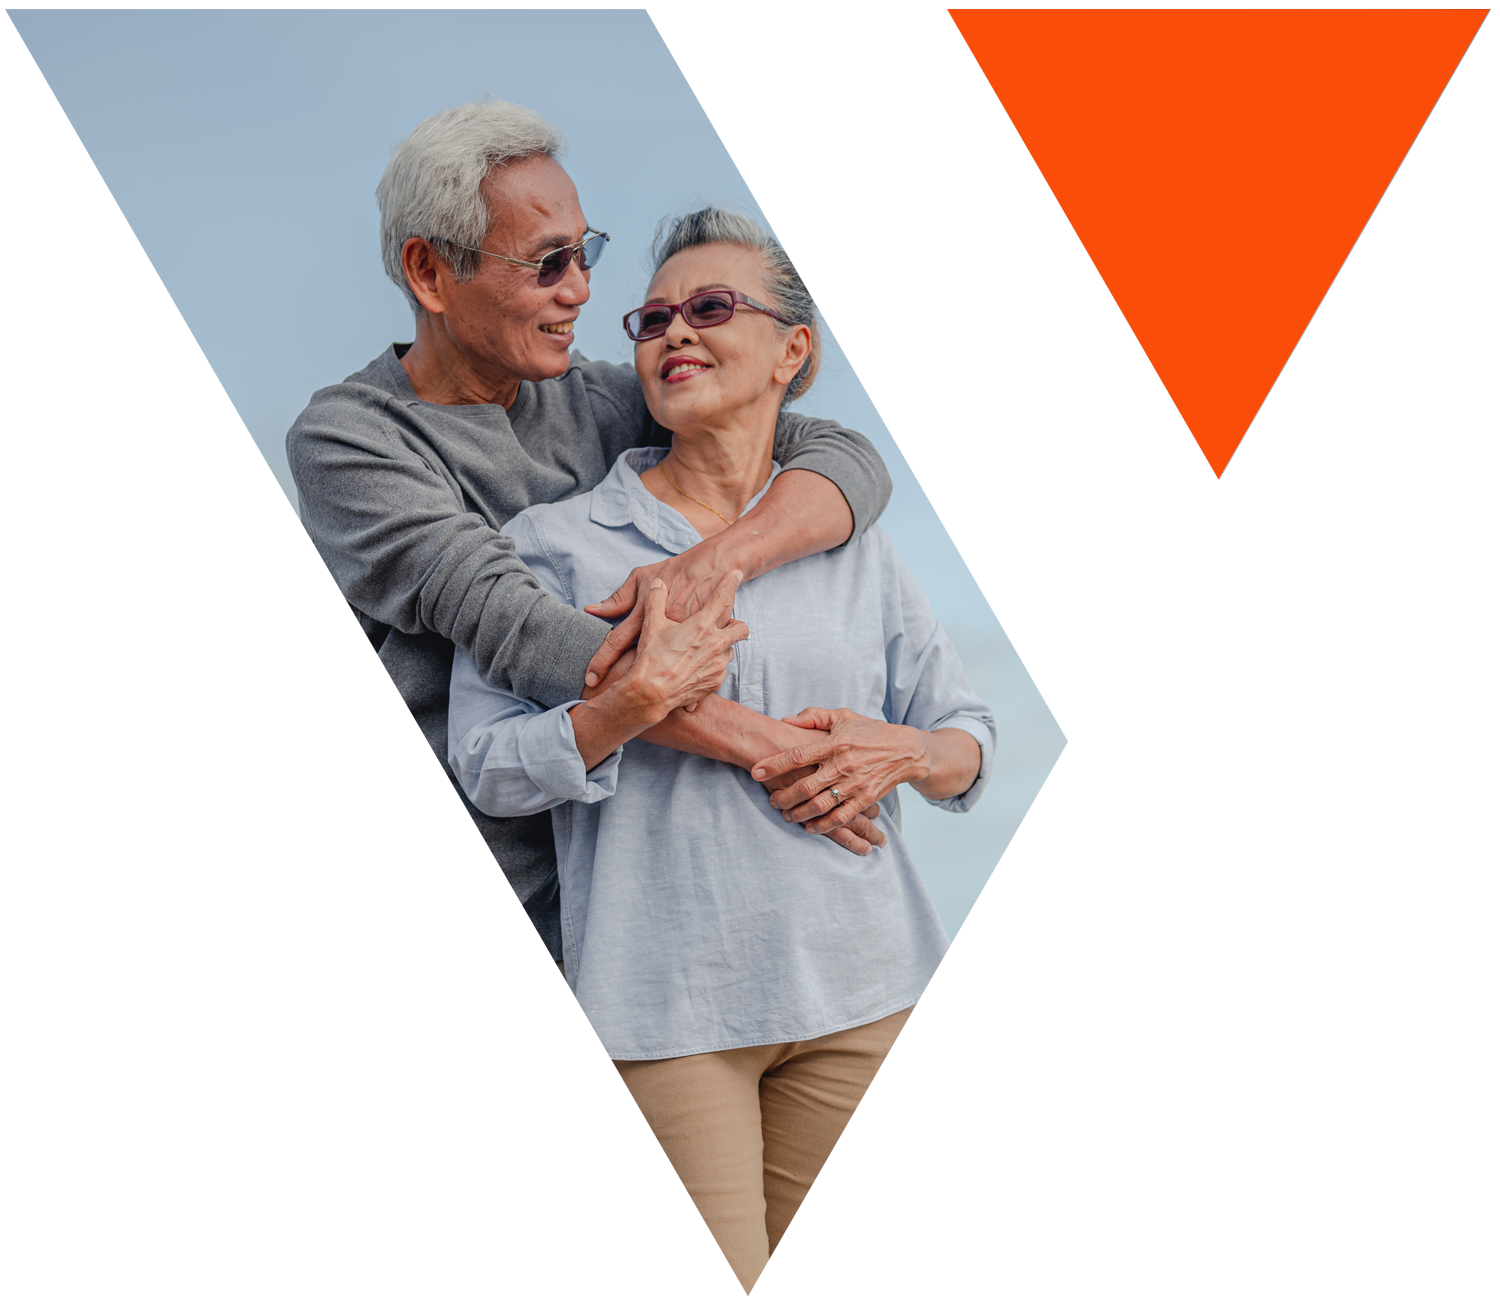 Older couple embraces in image shaped like the Vision Financial Group logo